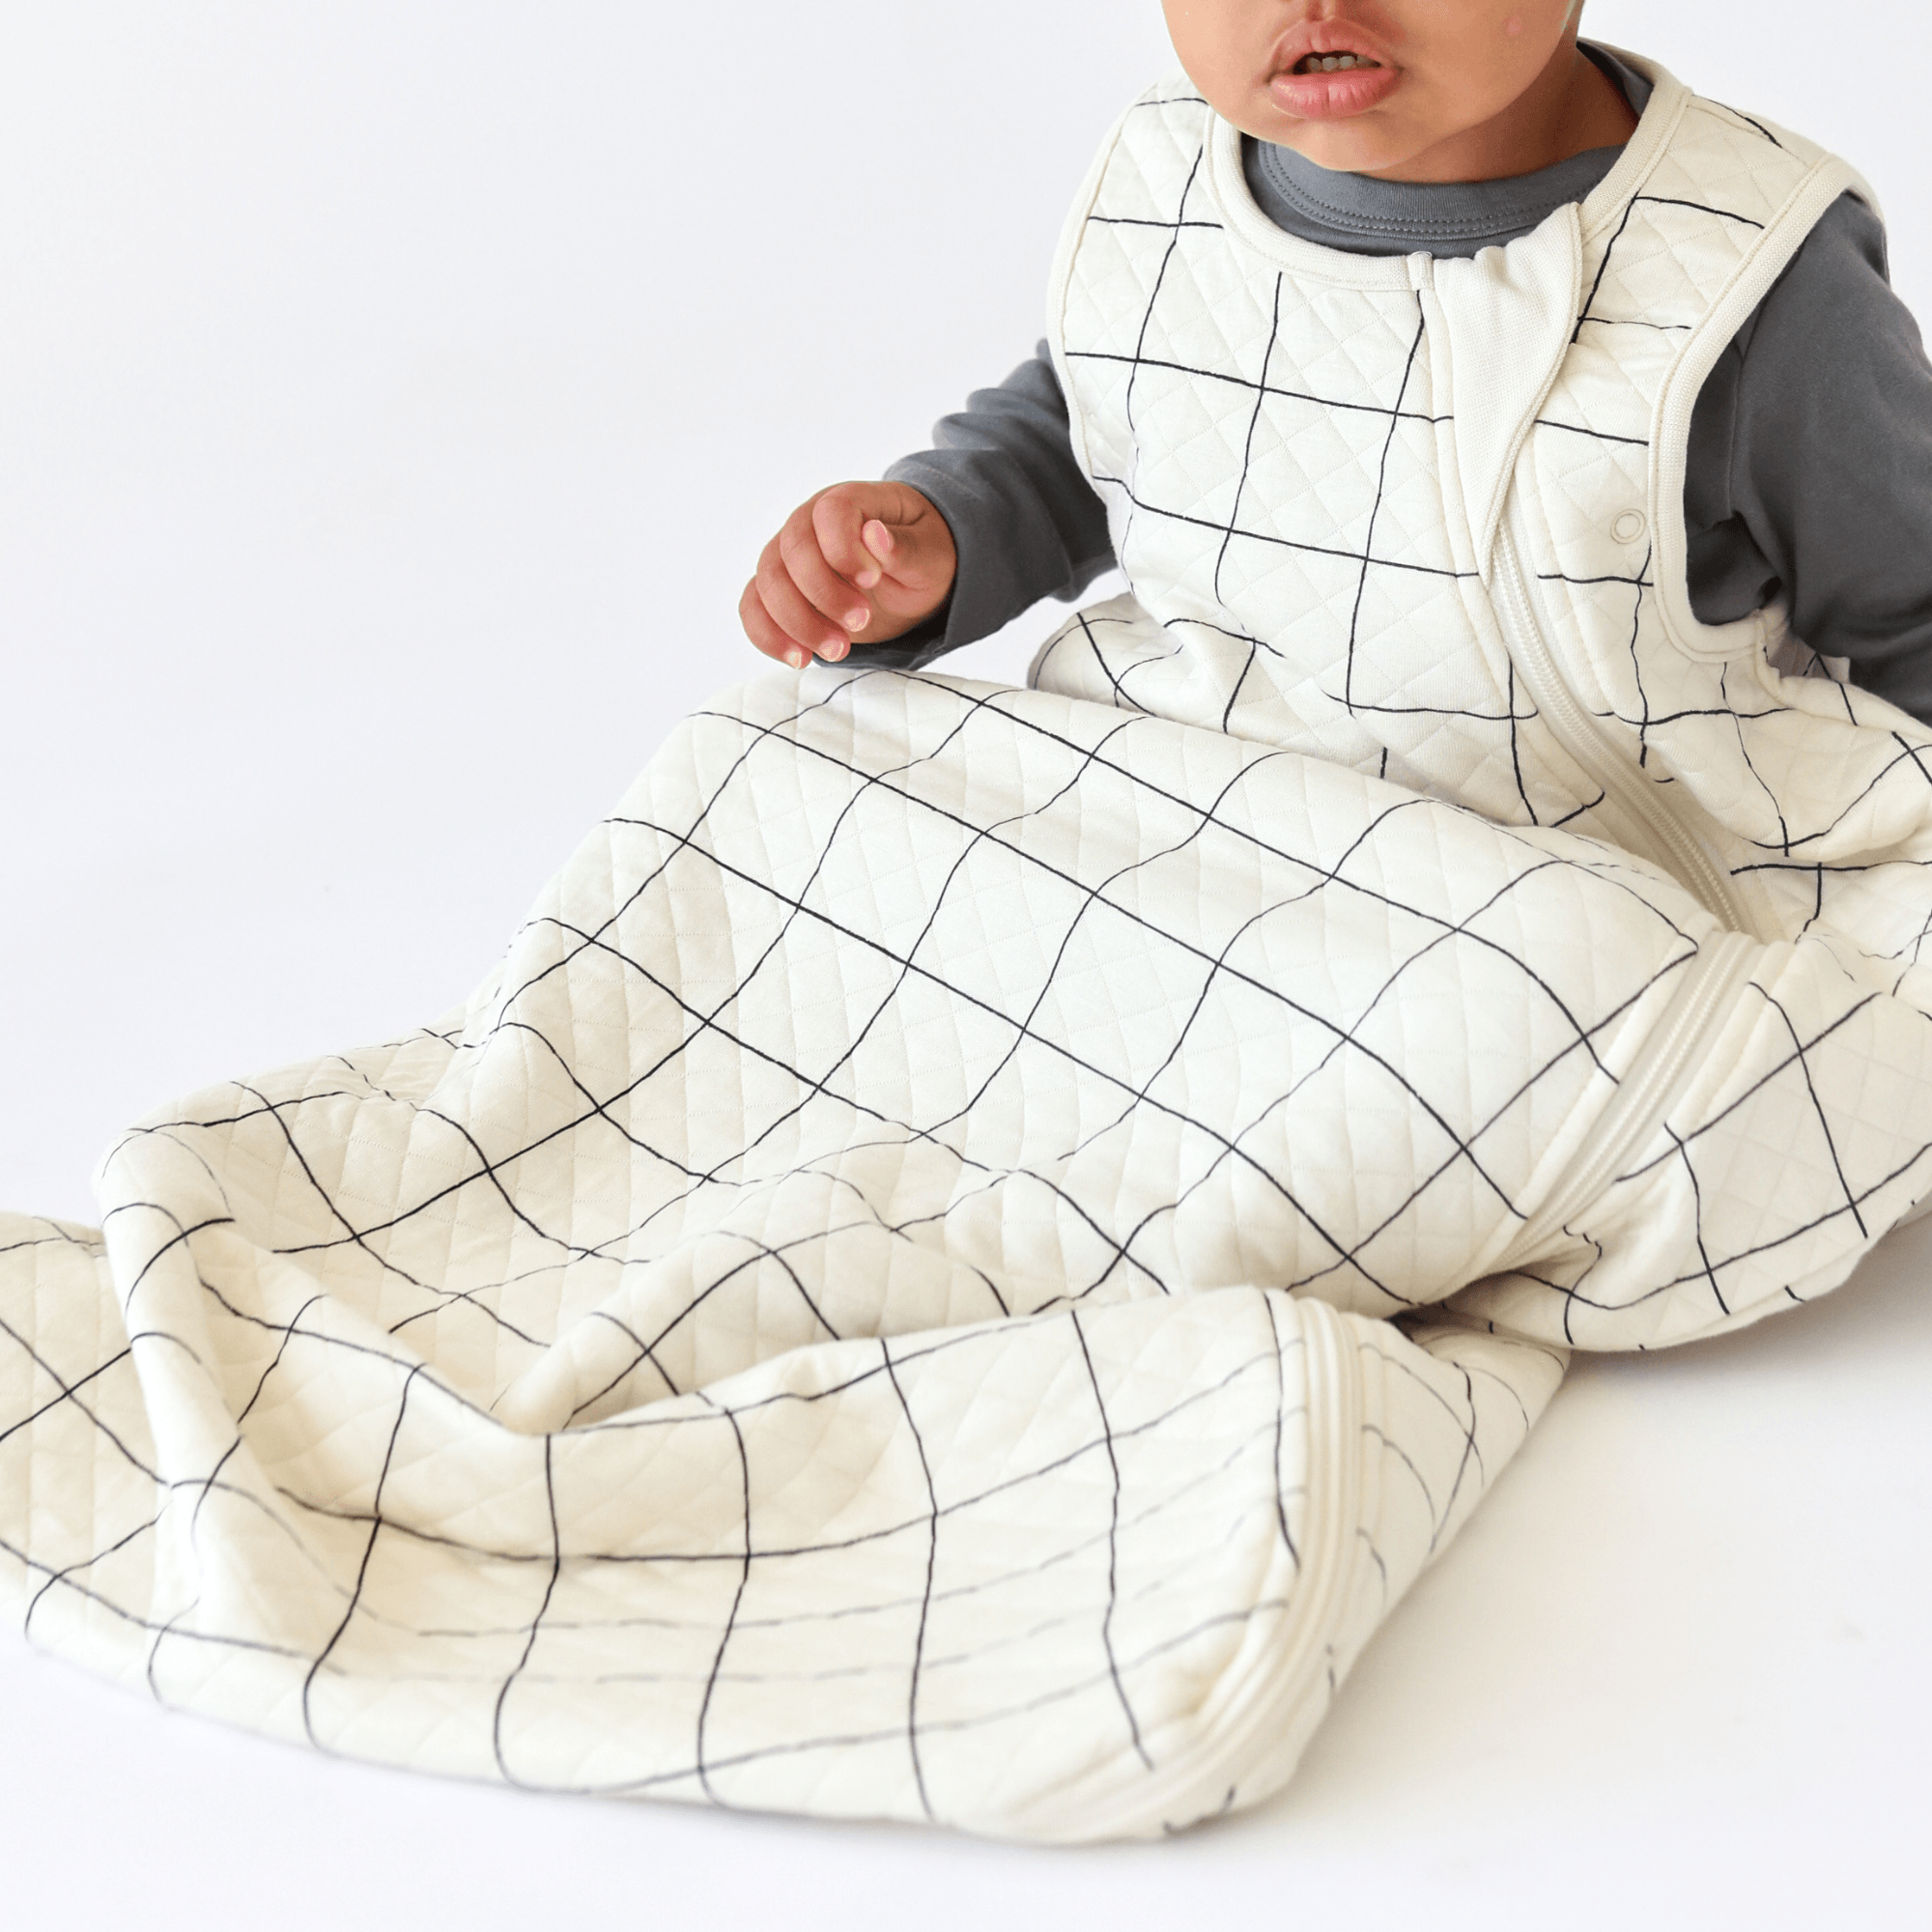 Full view of Tealbee Dreambag Checkered showing two-way zipper for easy diaper changes